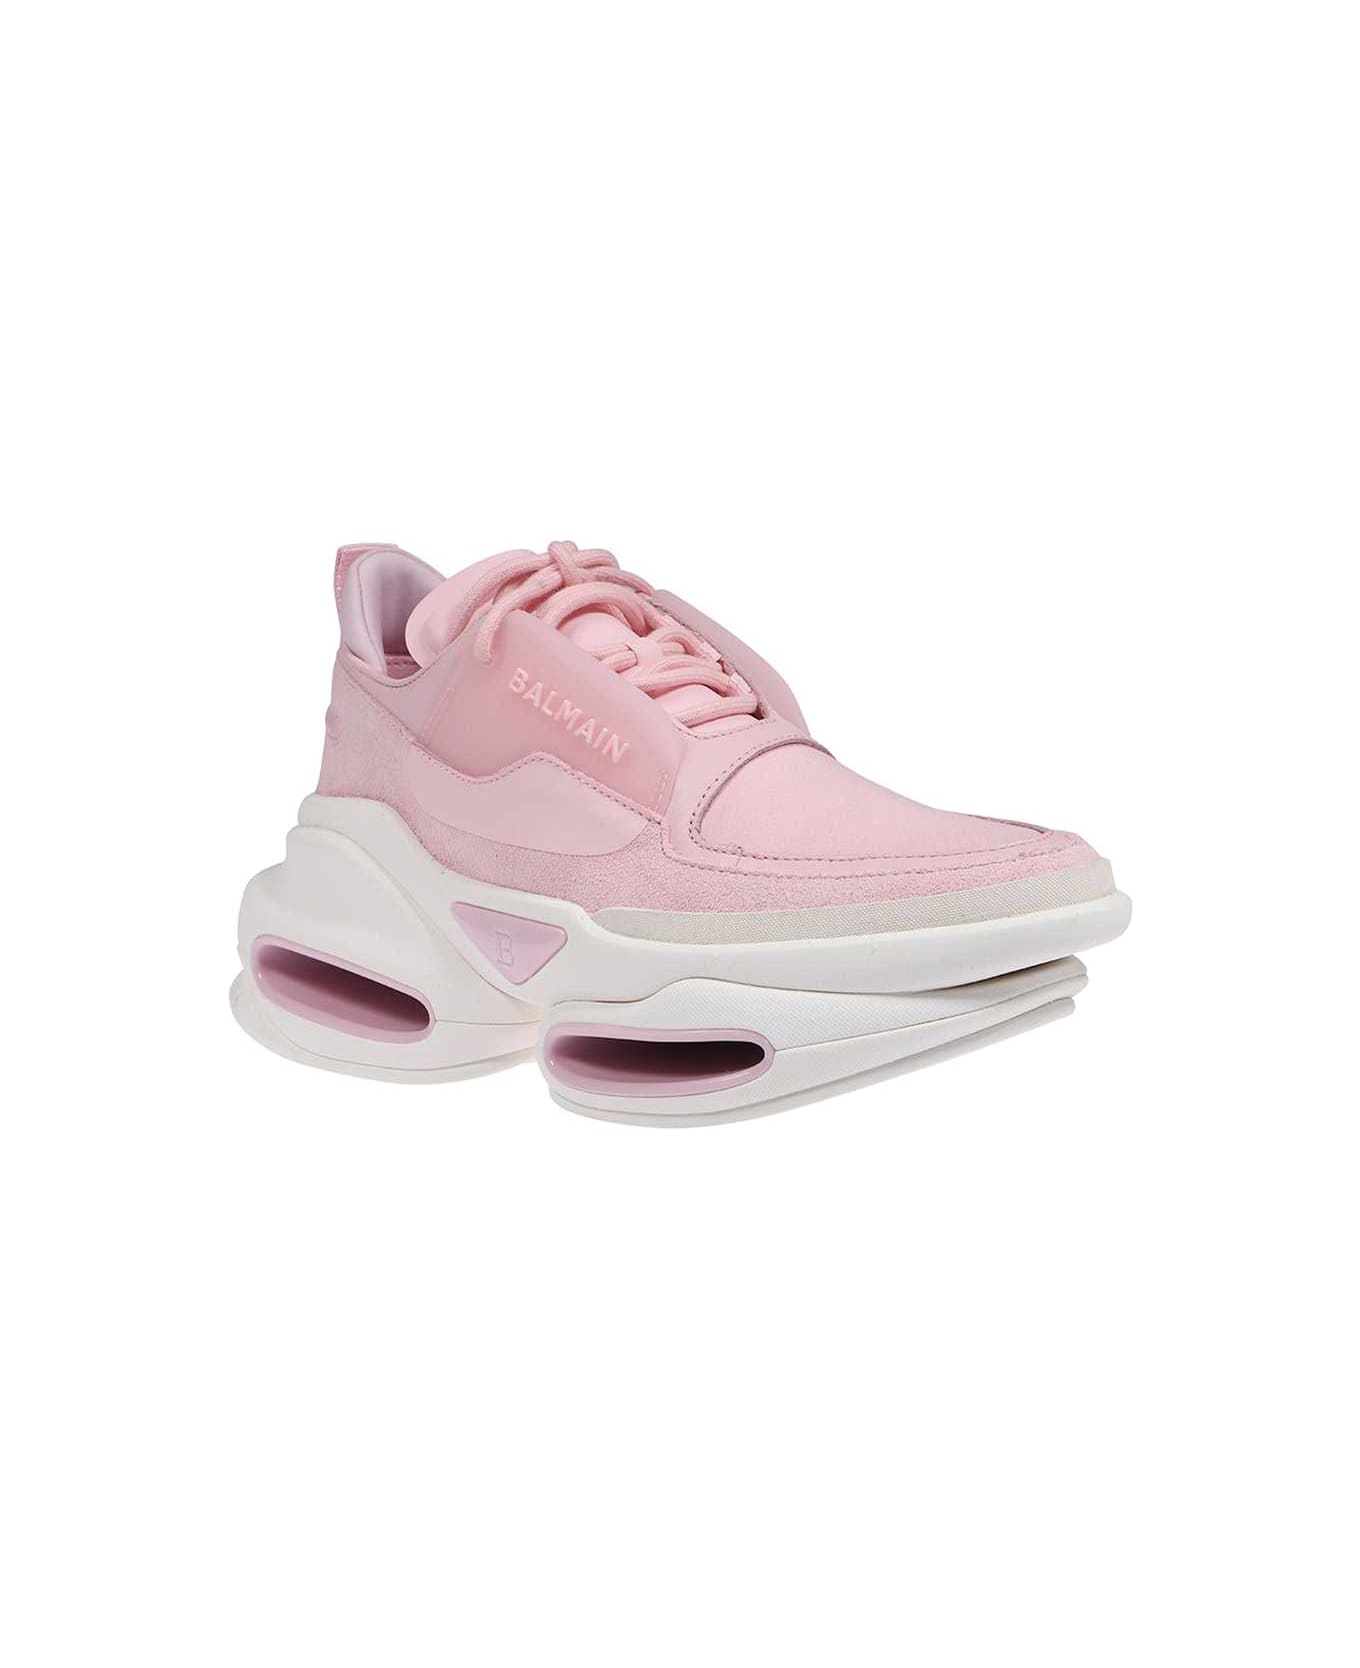 Balmain Leather Mid-top Sneakers - Pink